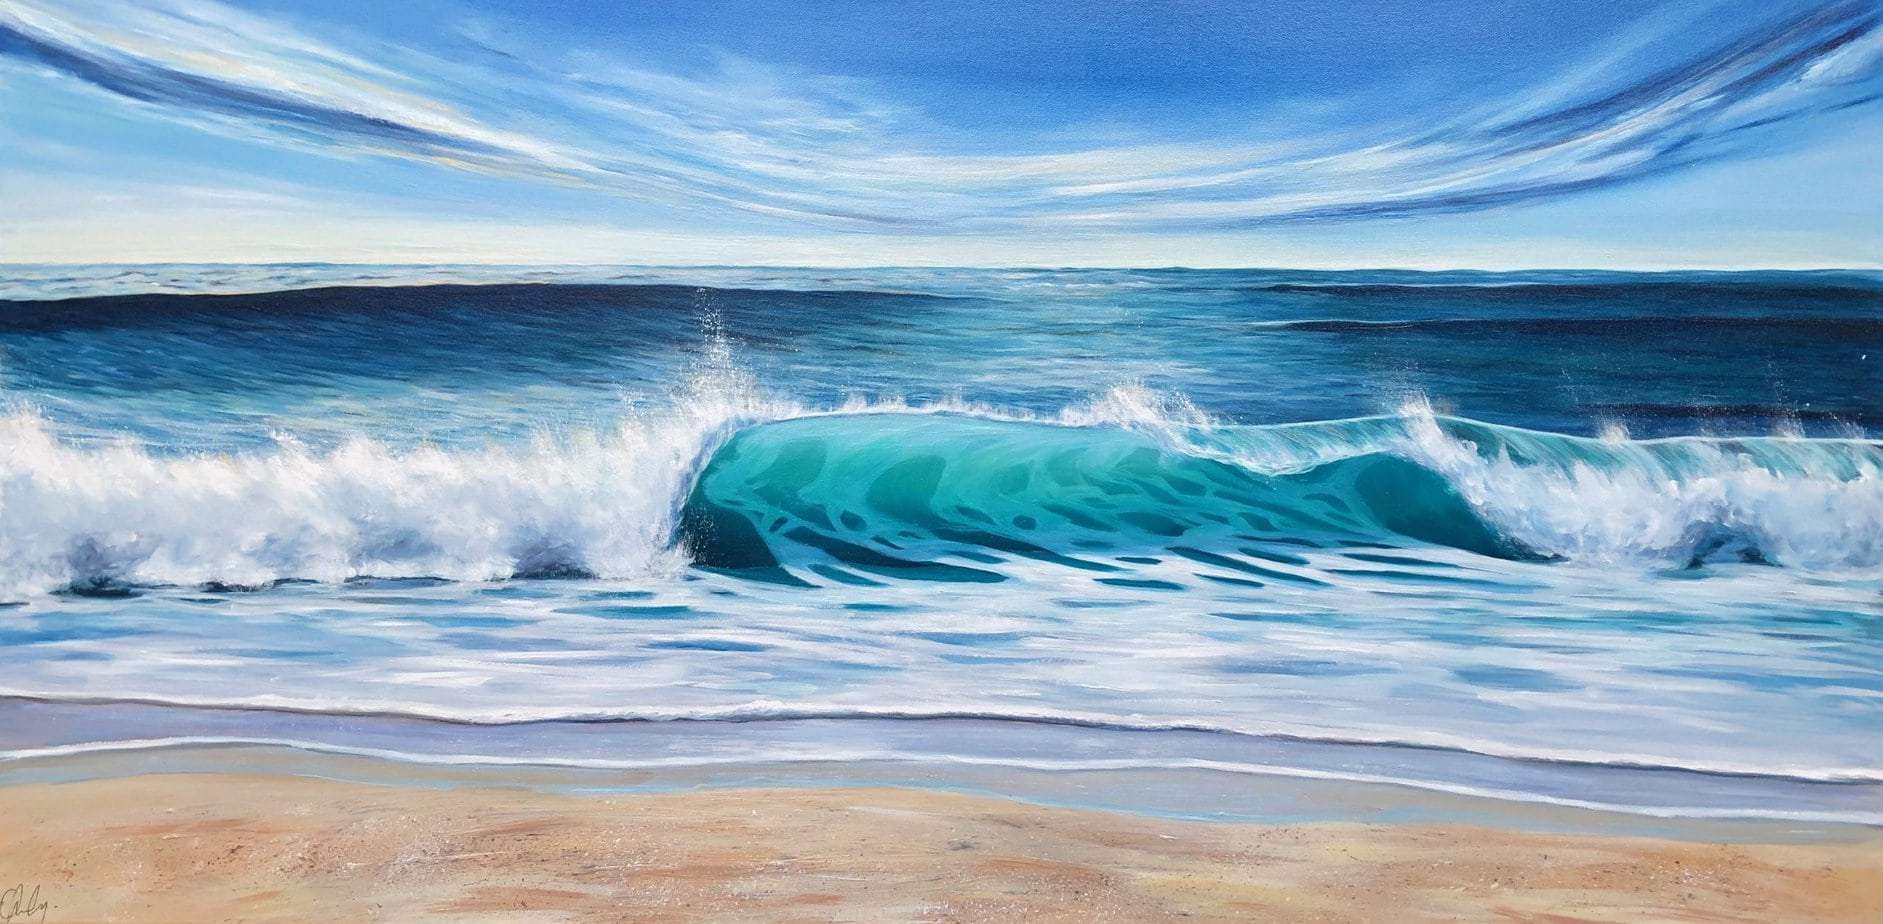 Turquoise Beach Wave II original seascape oil painting on canvas. Framed and ready to hang. For sale online